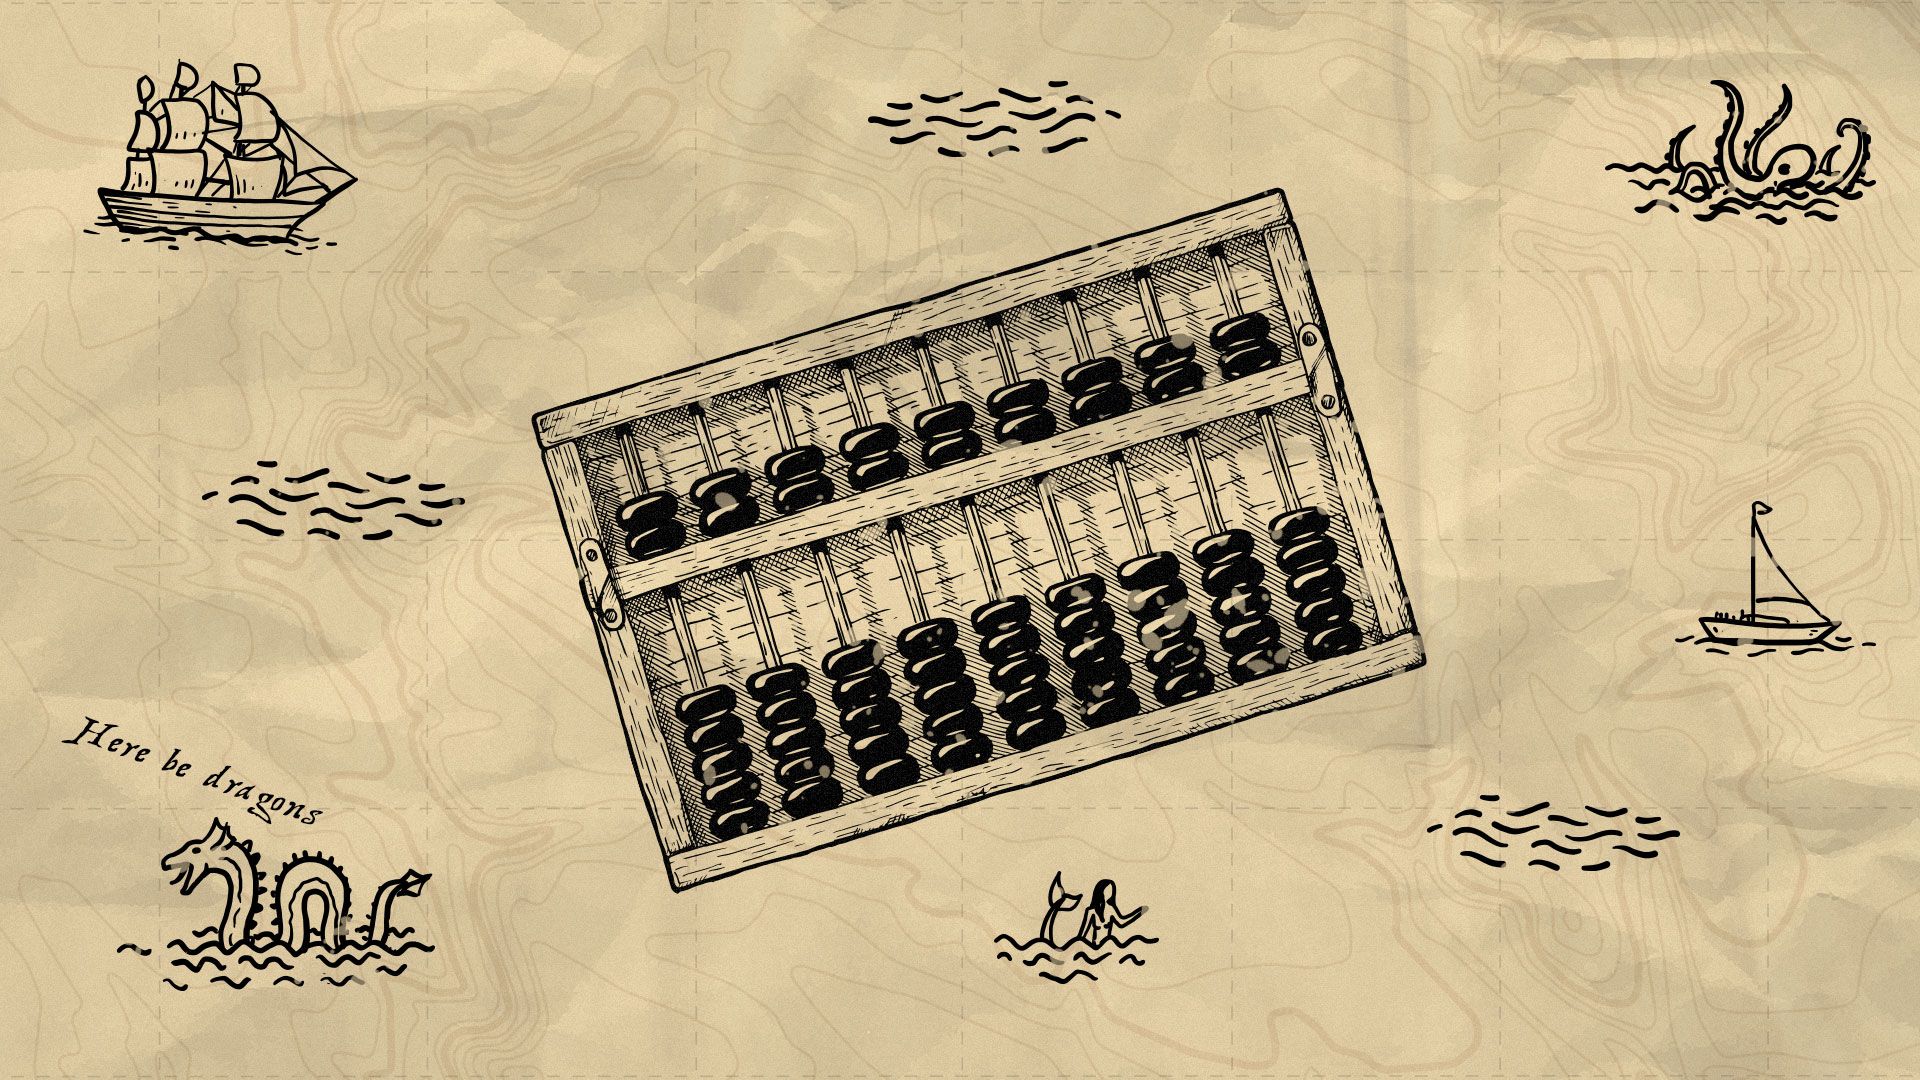 Illustration of a pirate map with an abacus in the center, off to the side, "Here be dragons" is visible. 